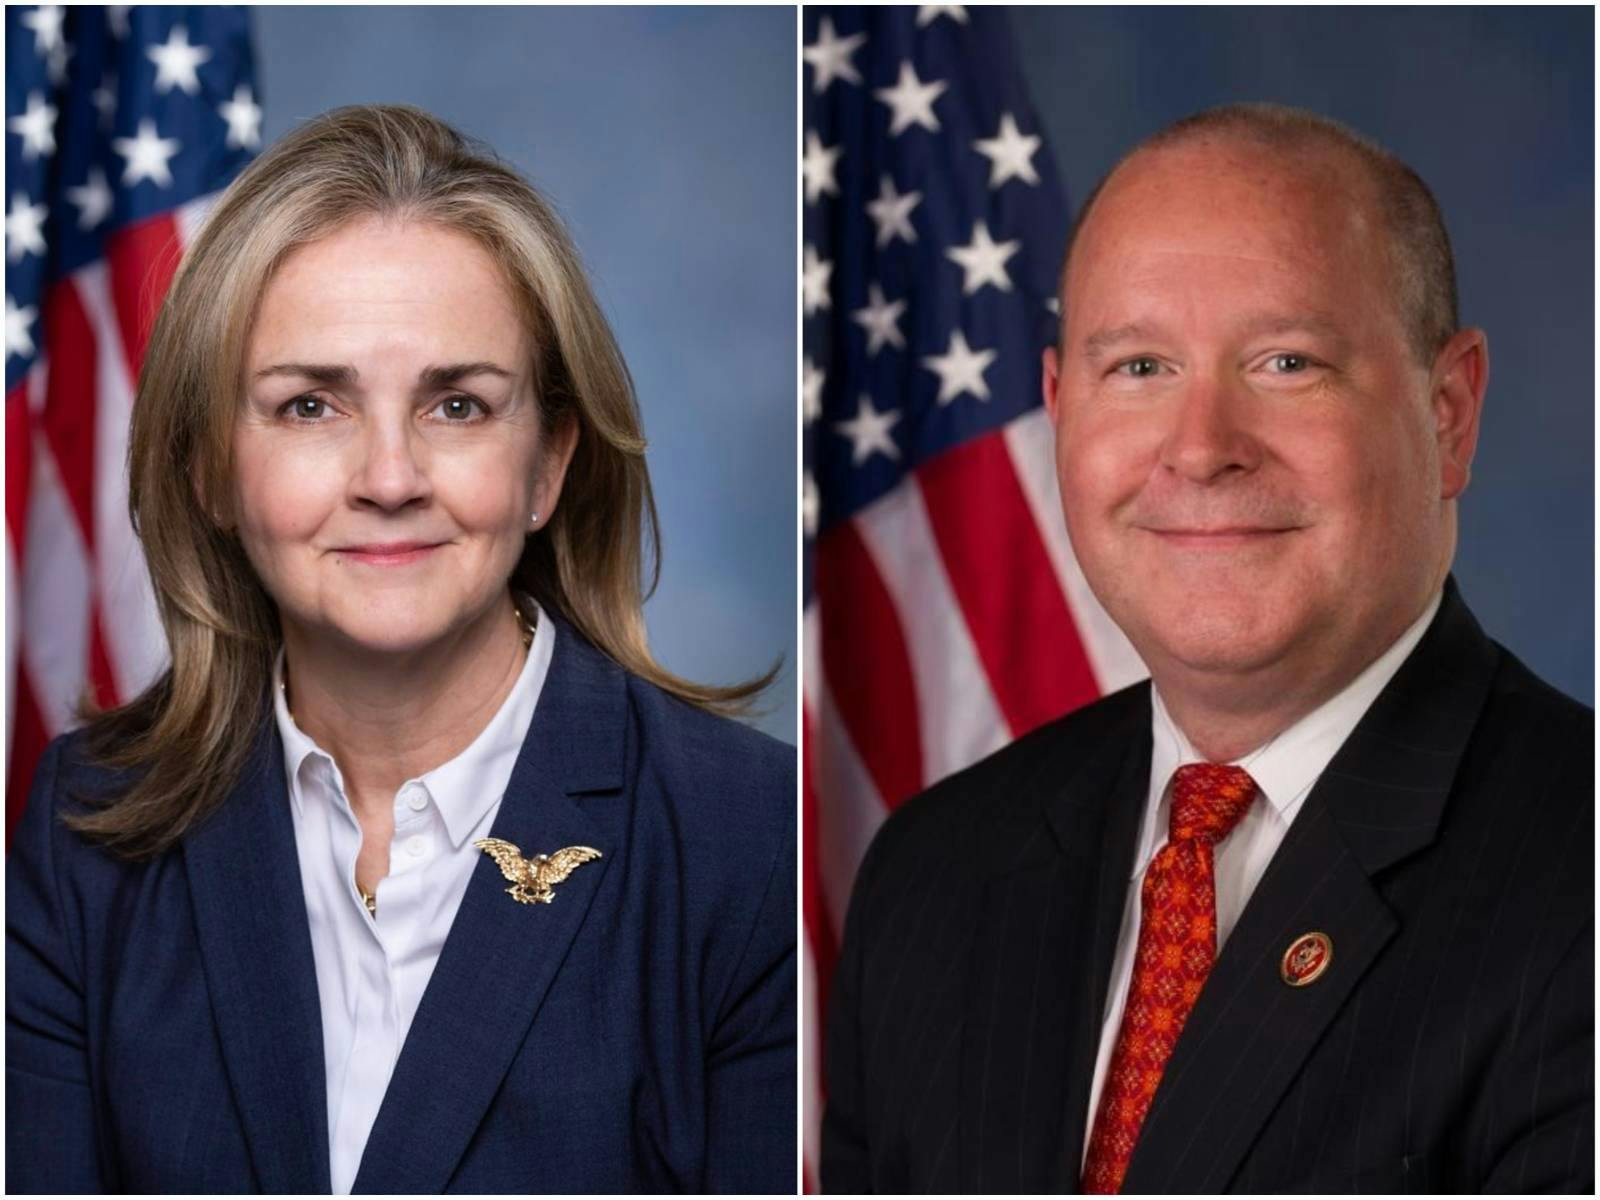 U.S. Reps. Madeleine Dean, D-Pa., and Larry Bucshon, R-Ind., have introduced legislation to create federal protections for hospital workers. (Photos: U.S. House of Representatives)